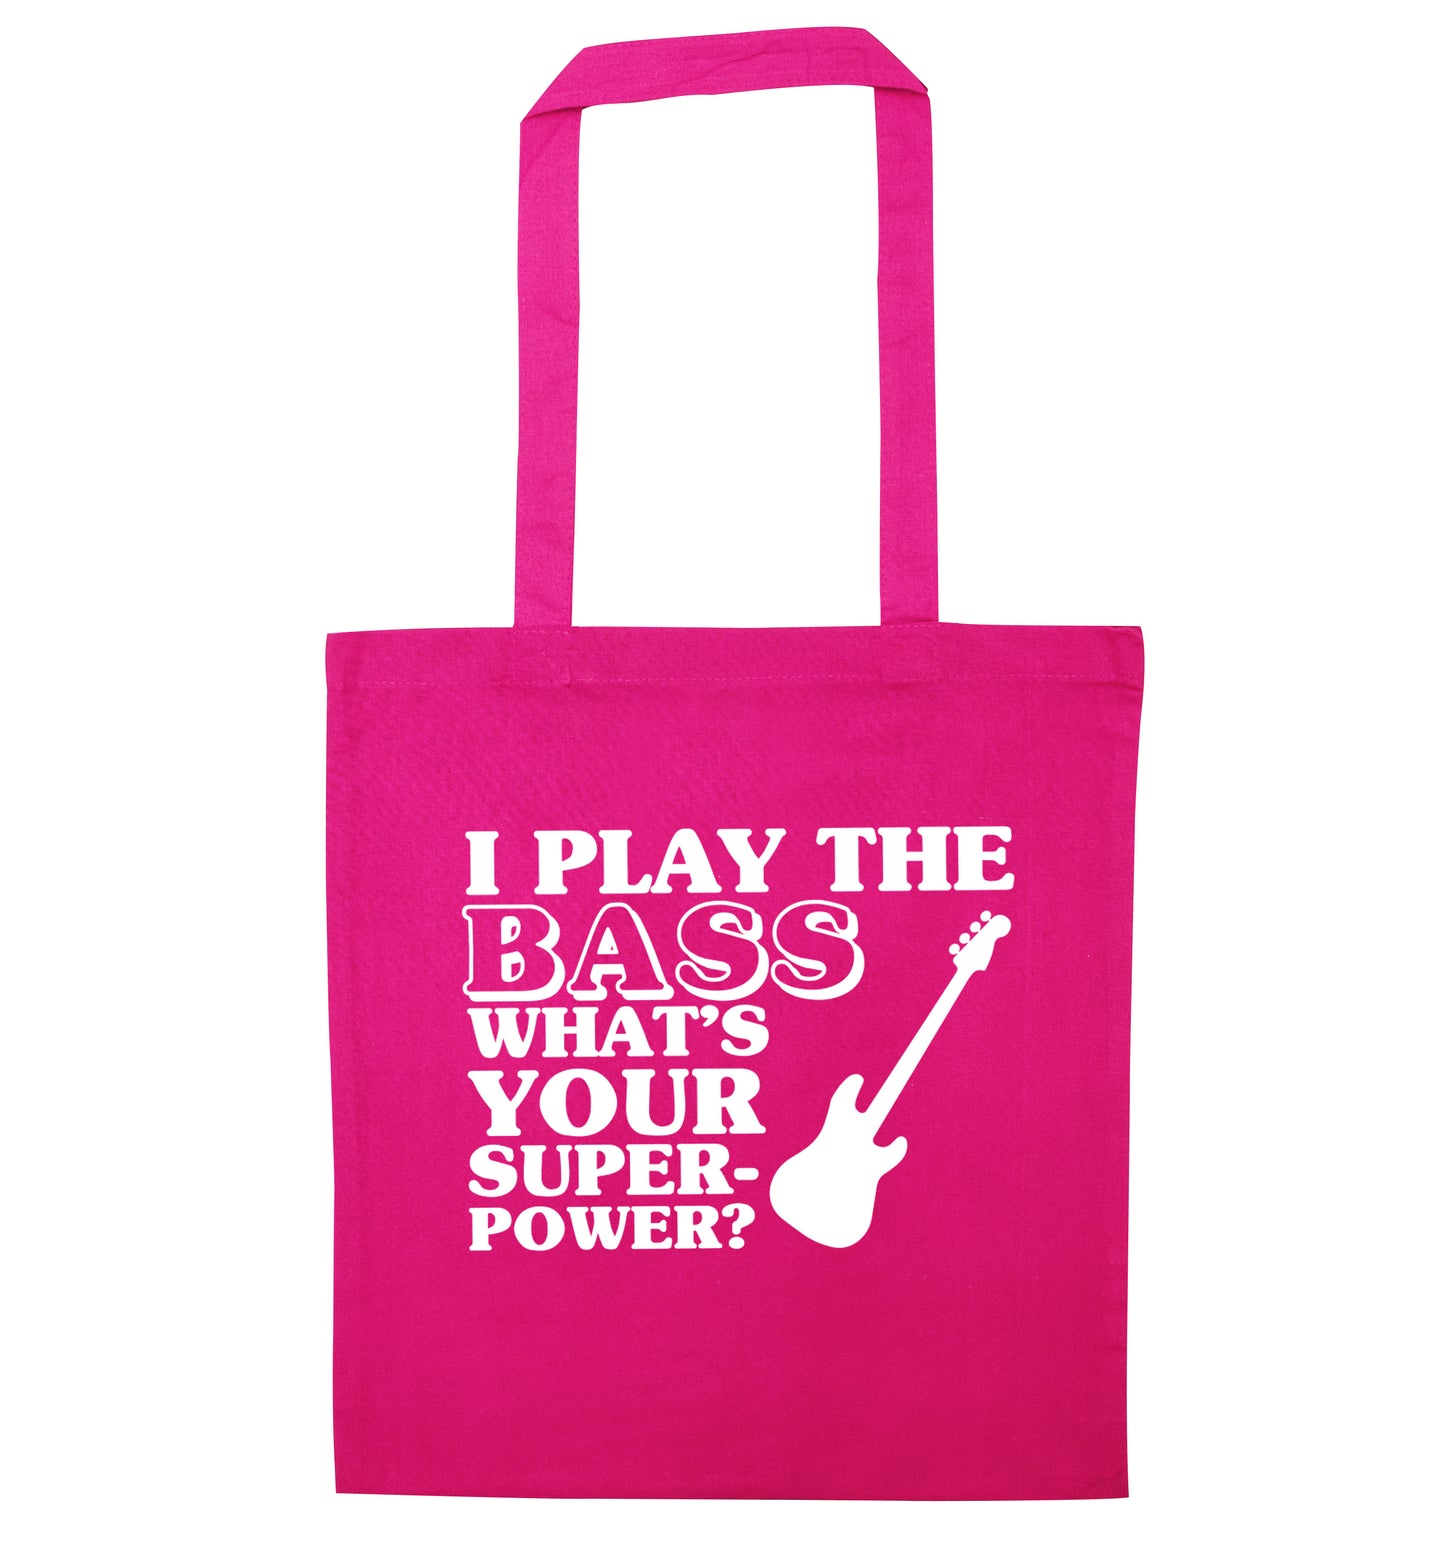 I play the bass what's your superpower? pink tote bag